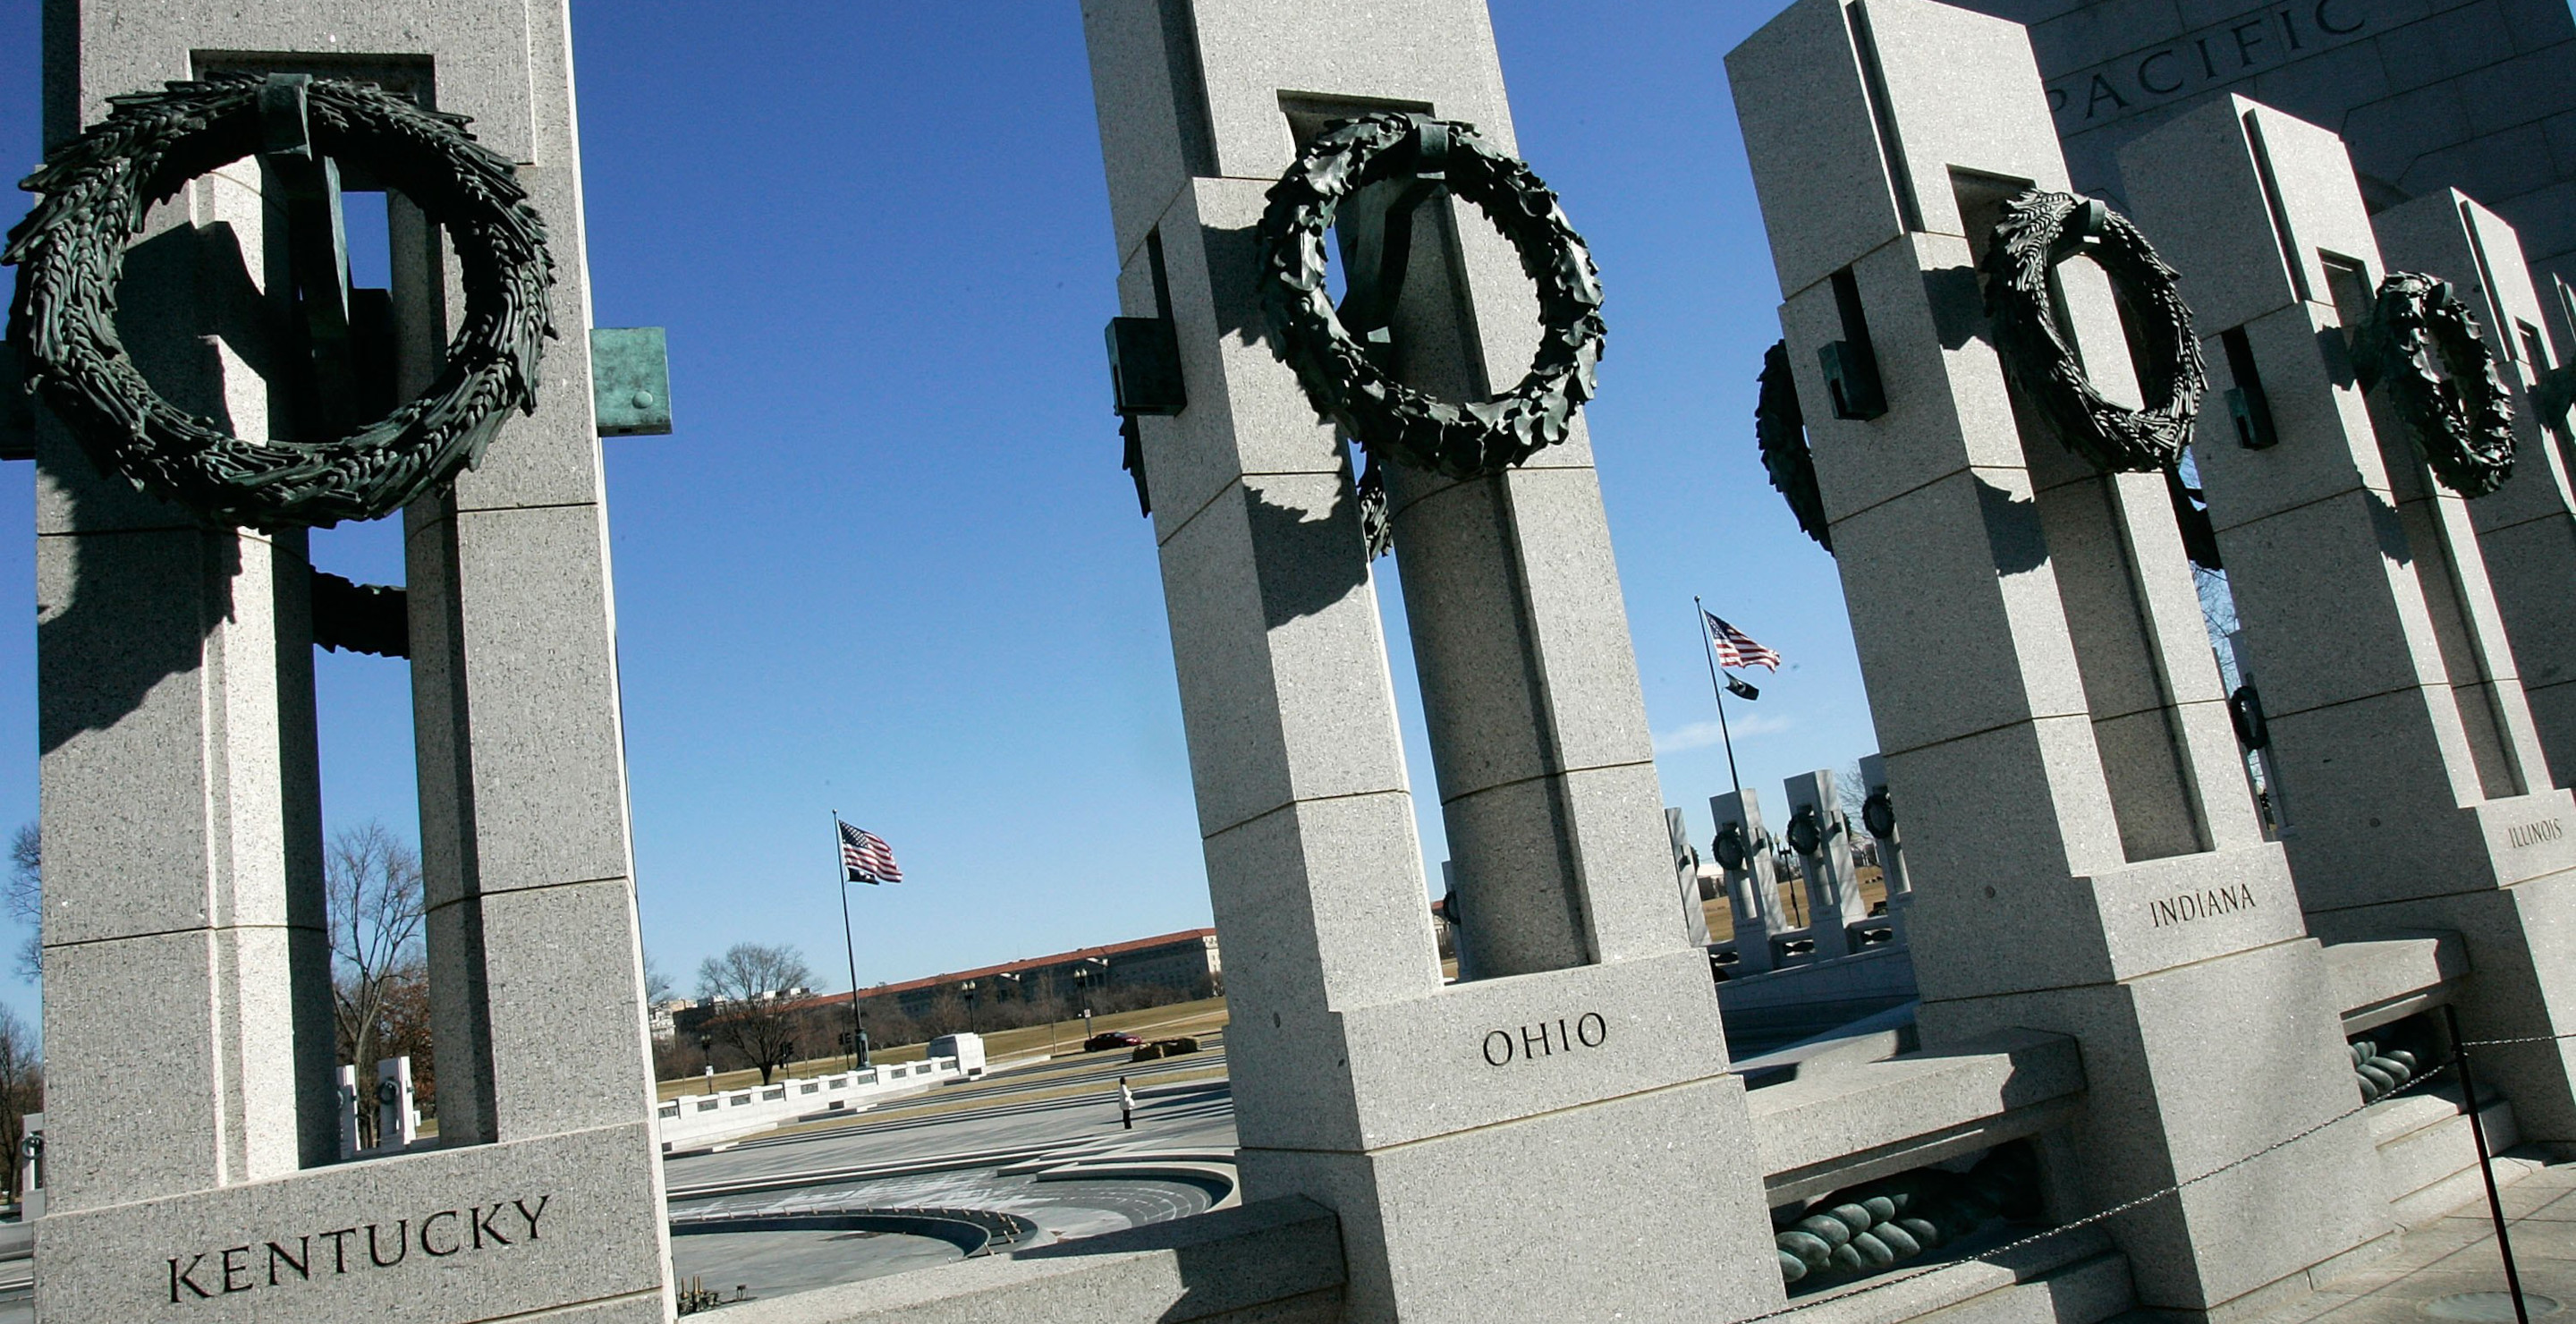 100-Year-Old Veteran Visits WWII Memorial To Honor Fallen Brothers